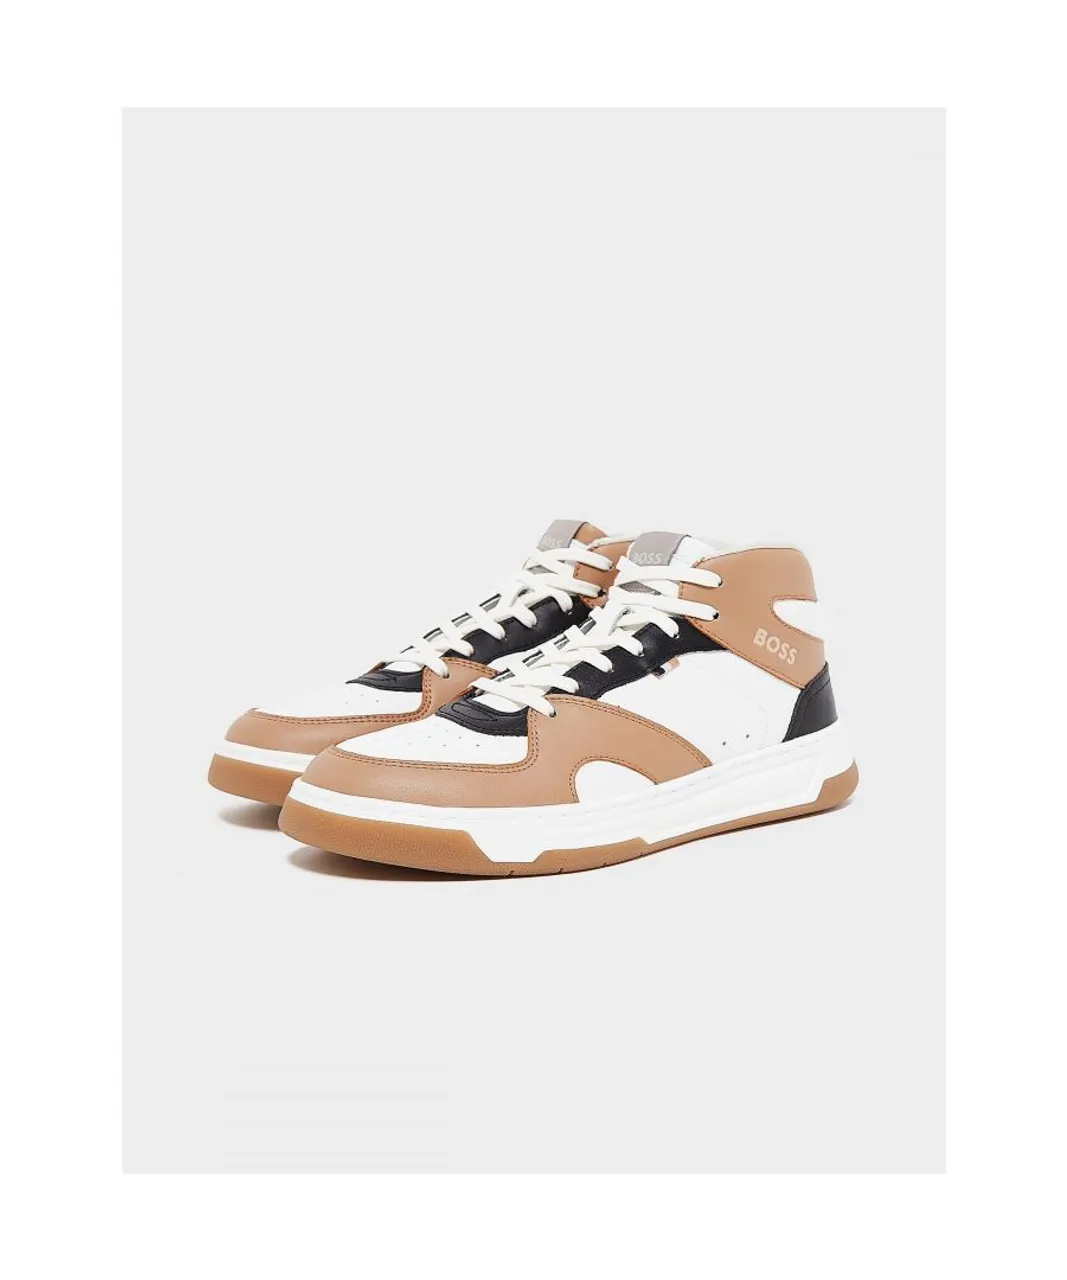 Hugo Boss Womenss Baltimore Trainers in Beige Leather